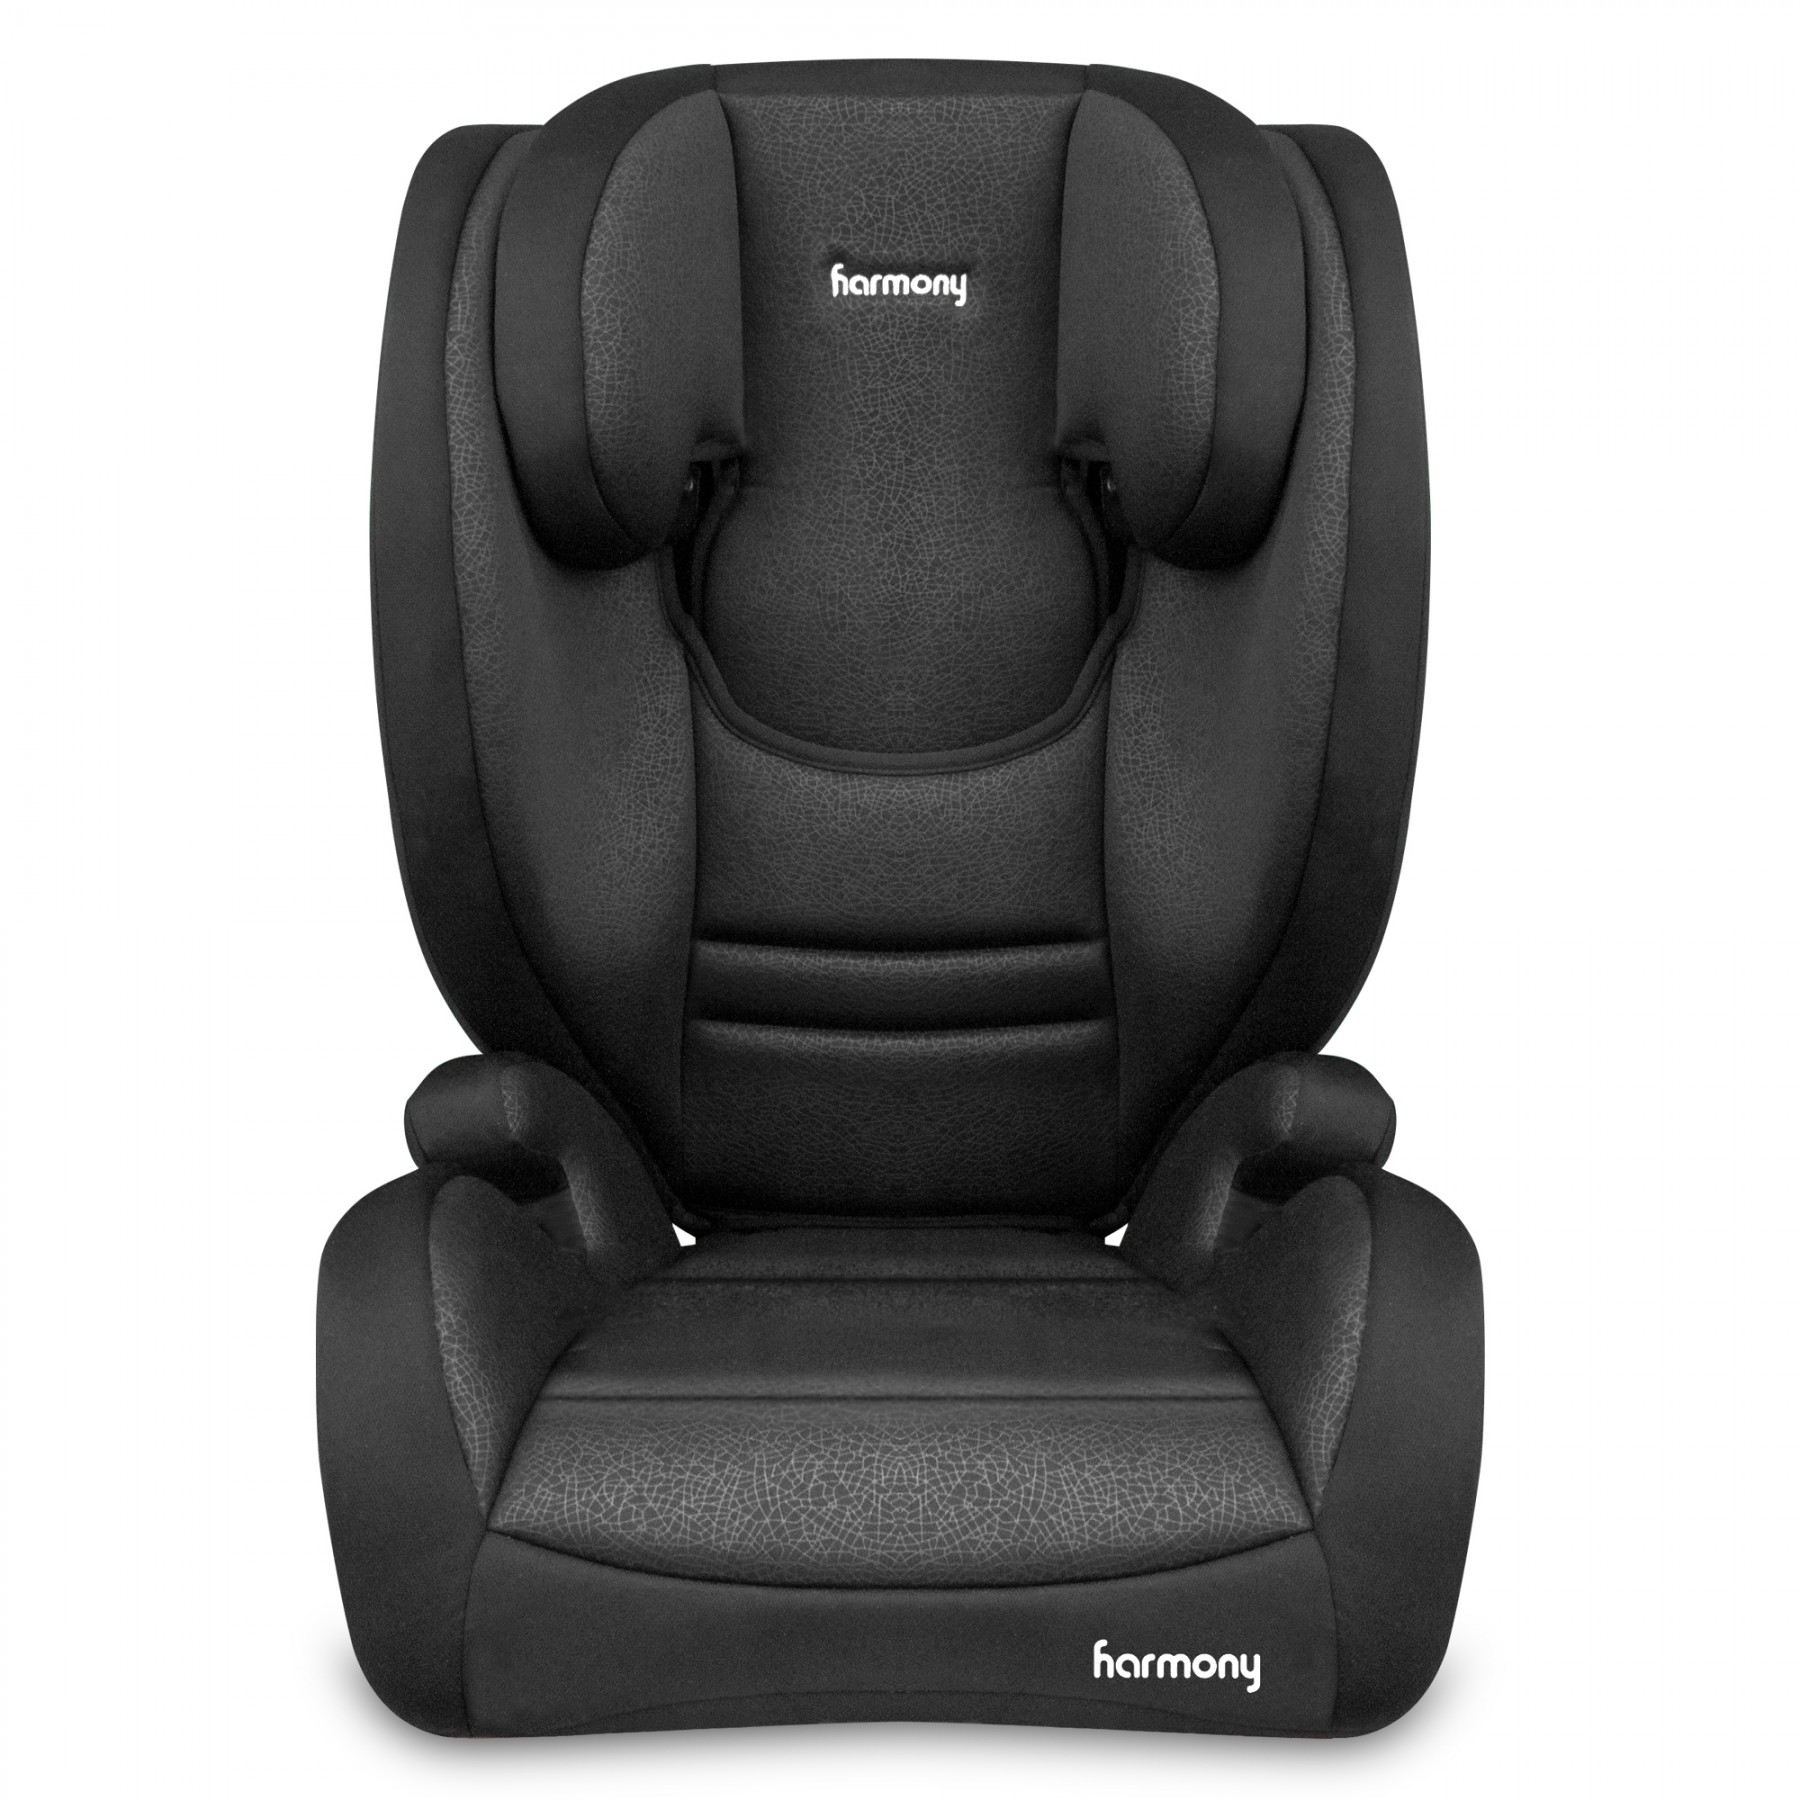 Genesys Deluxe i-Size Highback Booster Car Seat